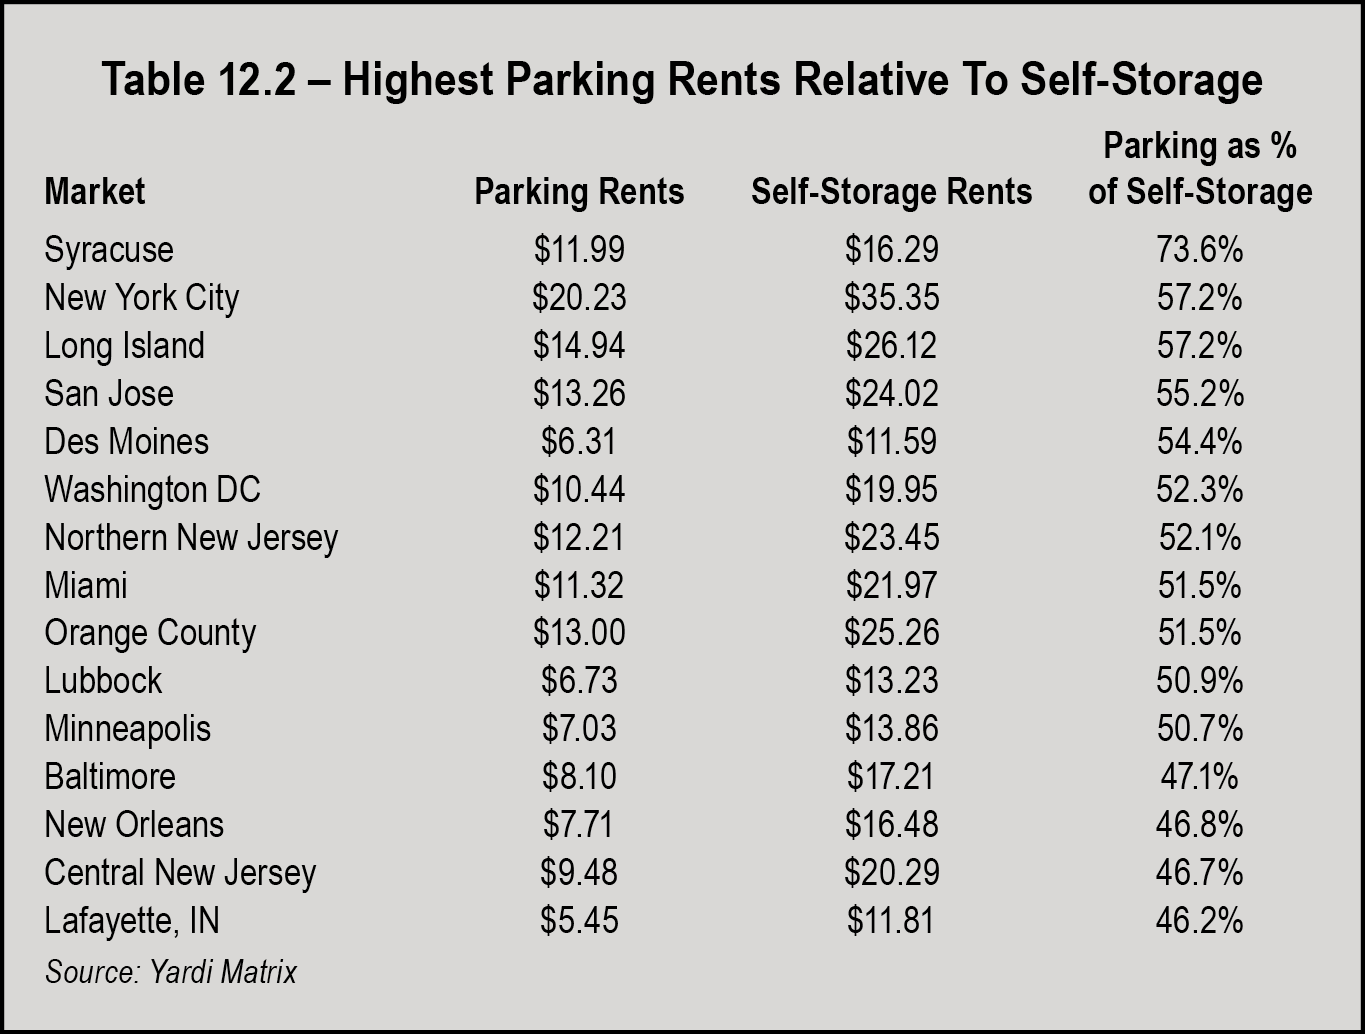 Table 12.2 - Highest Parking Rates Relative to Self-Storage